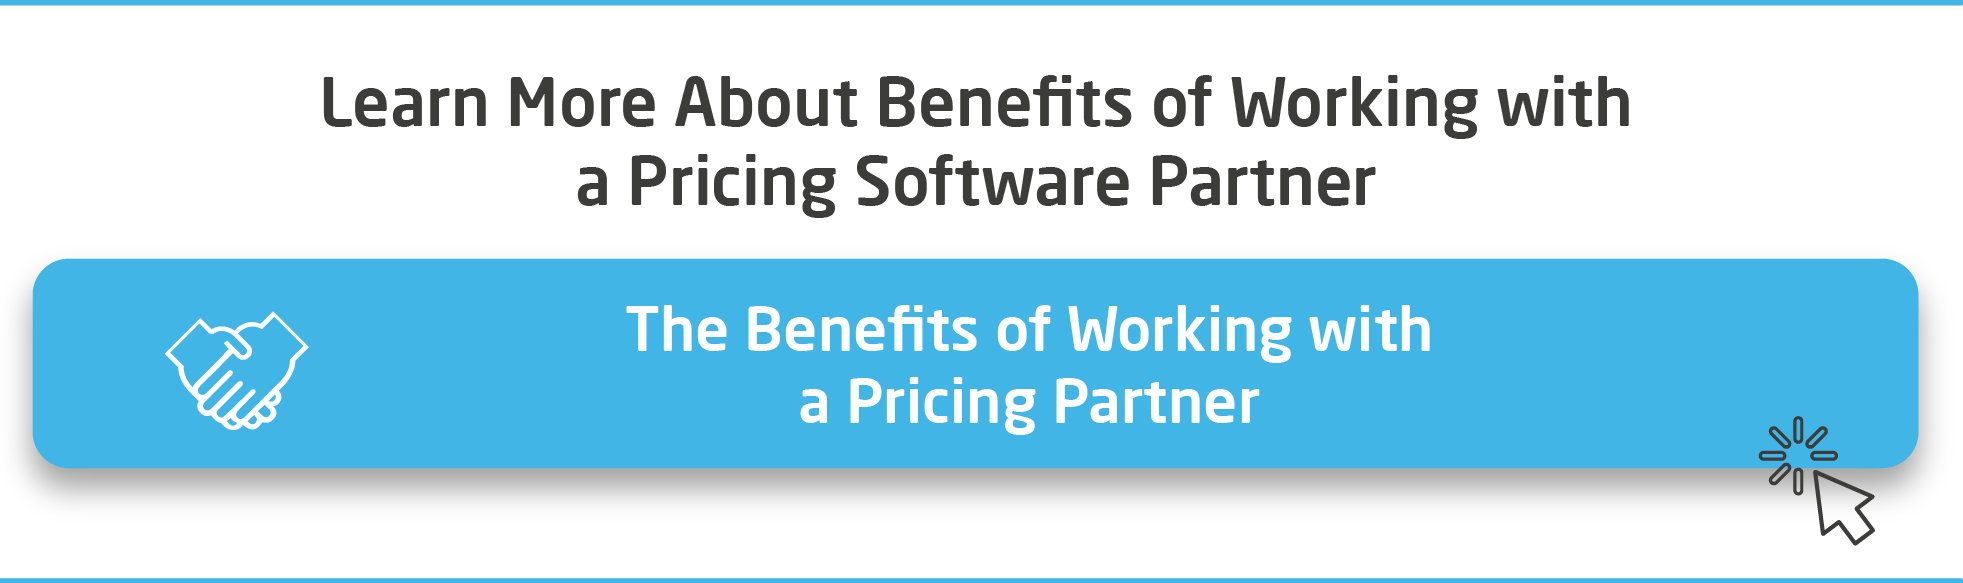 CTA-Benefits-of-Working-With-A-Software-Partner